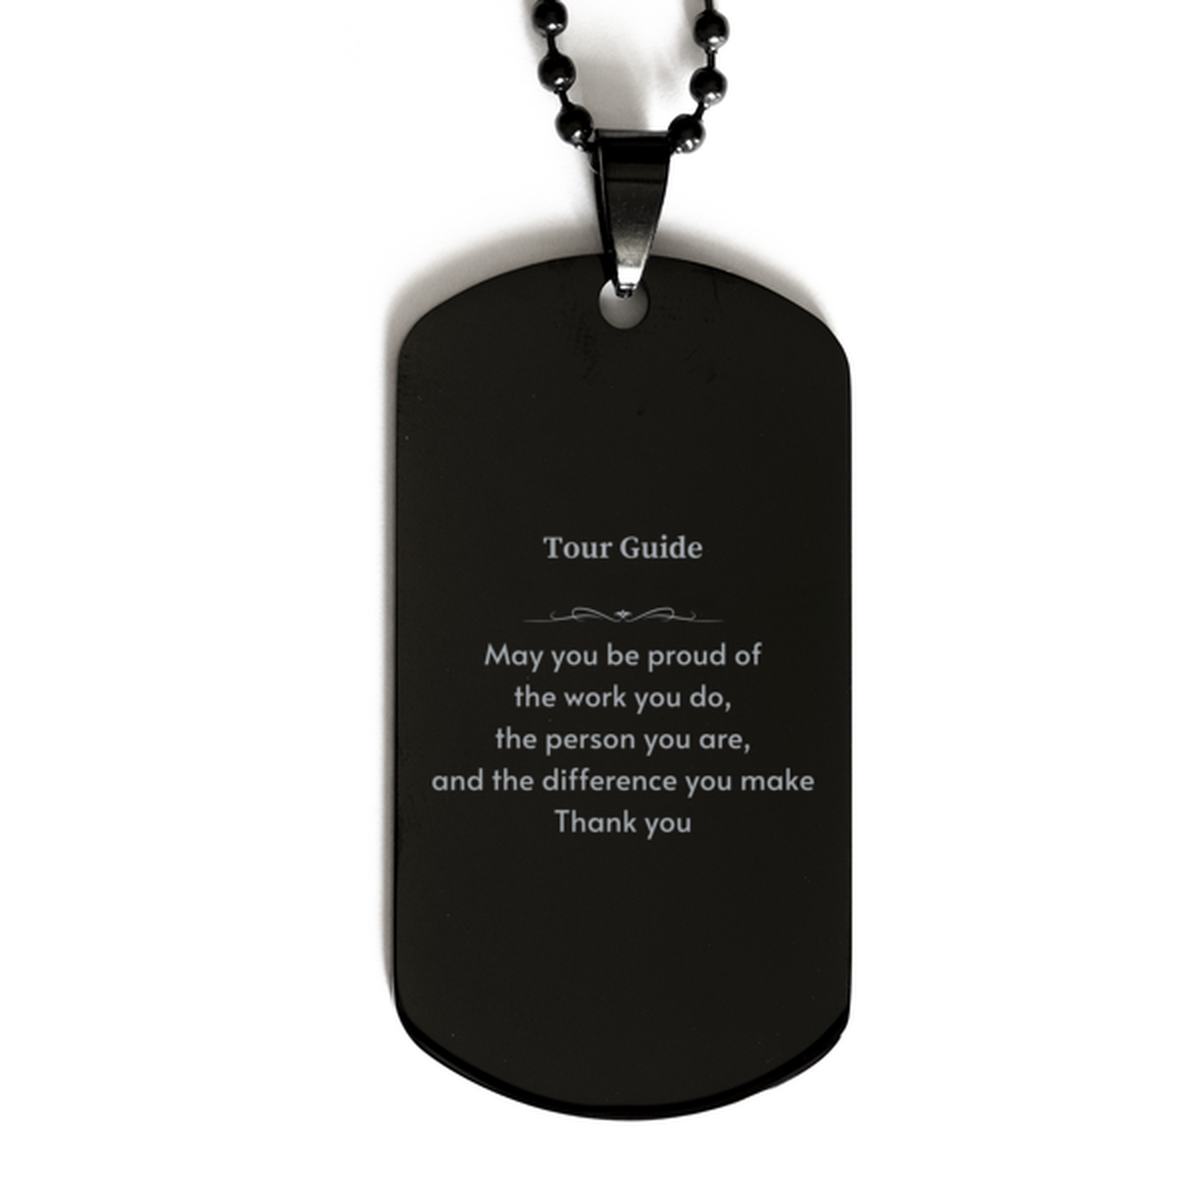 Heartwarming Black Dog Tag Retirement Coworkers Gifts for Tour Guide, Tour Guide May You be proud of the work you do, the person you are Gifts for Boss Men Women Friends